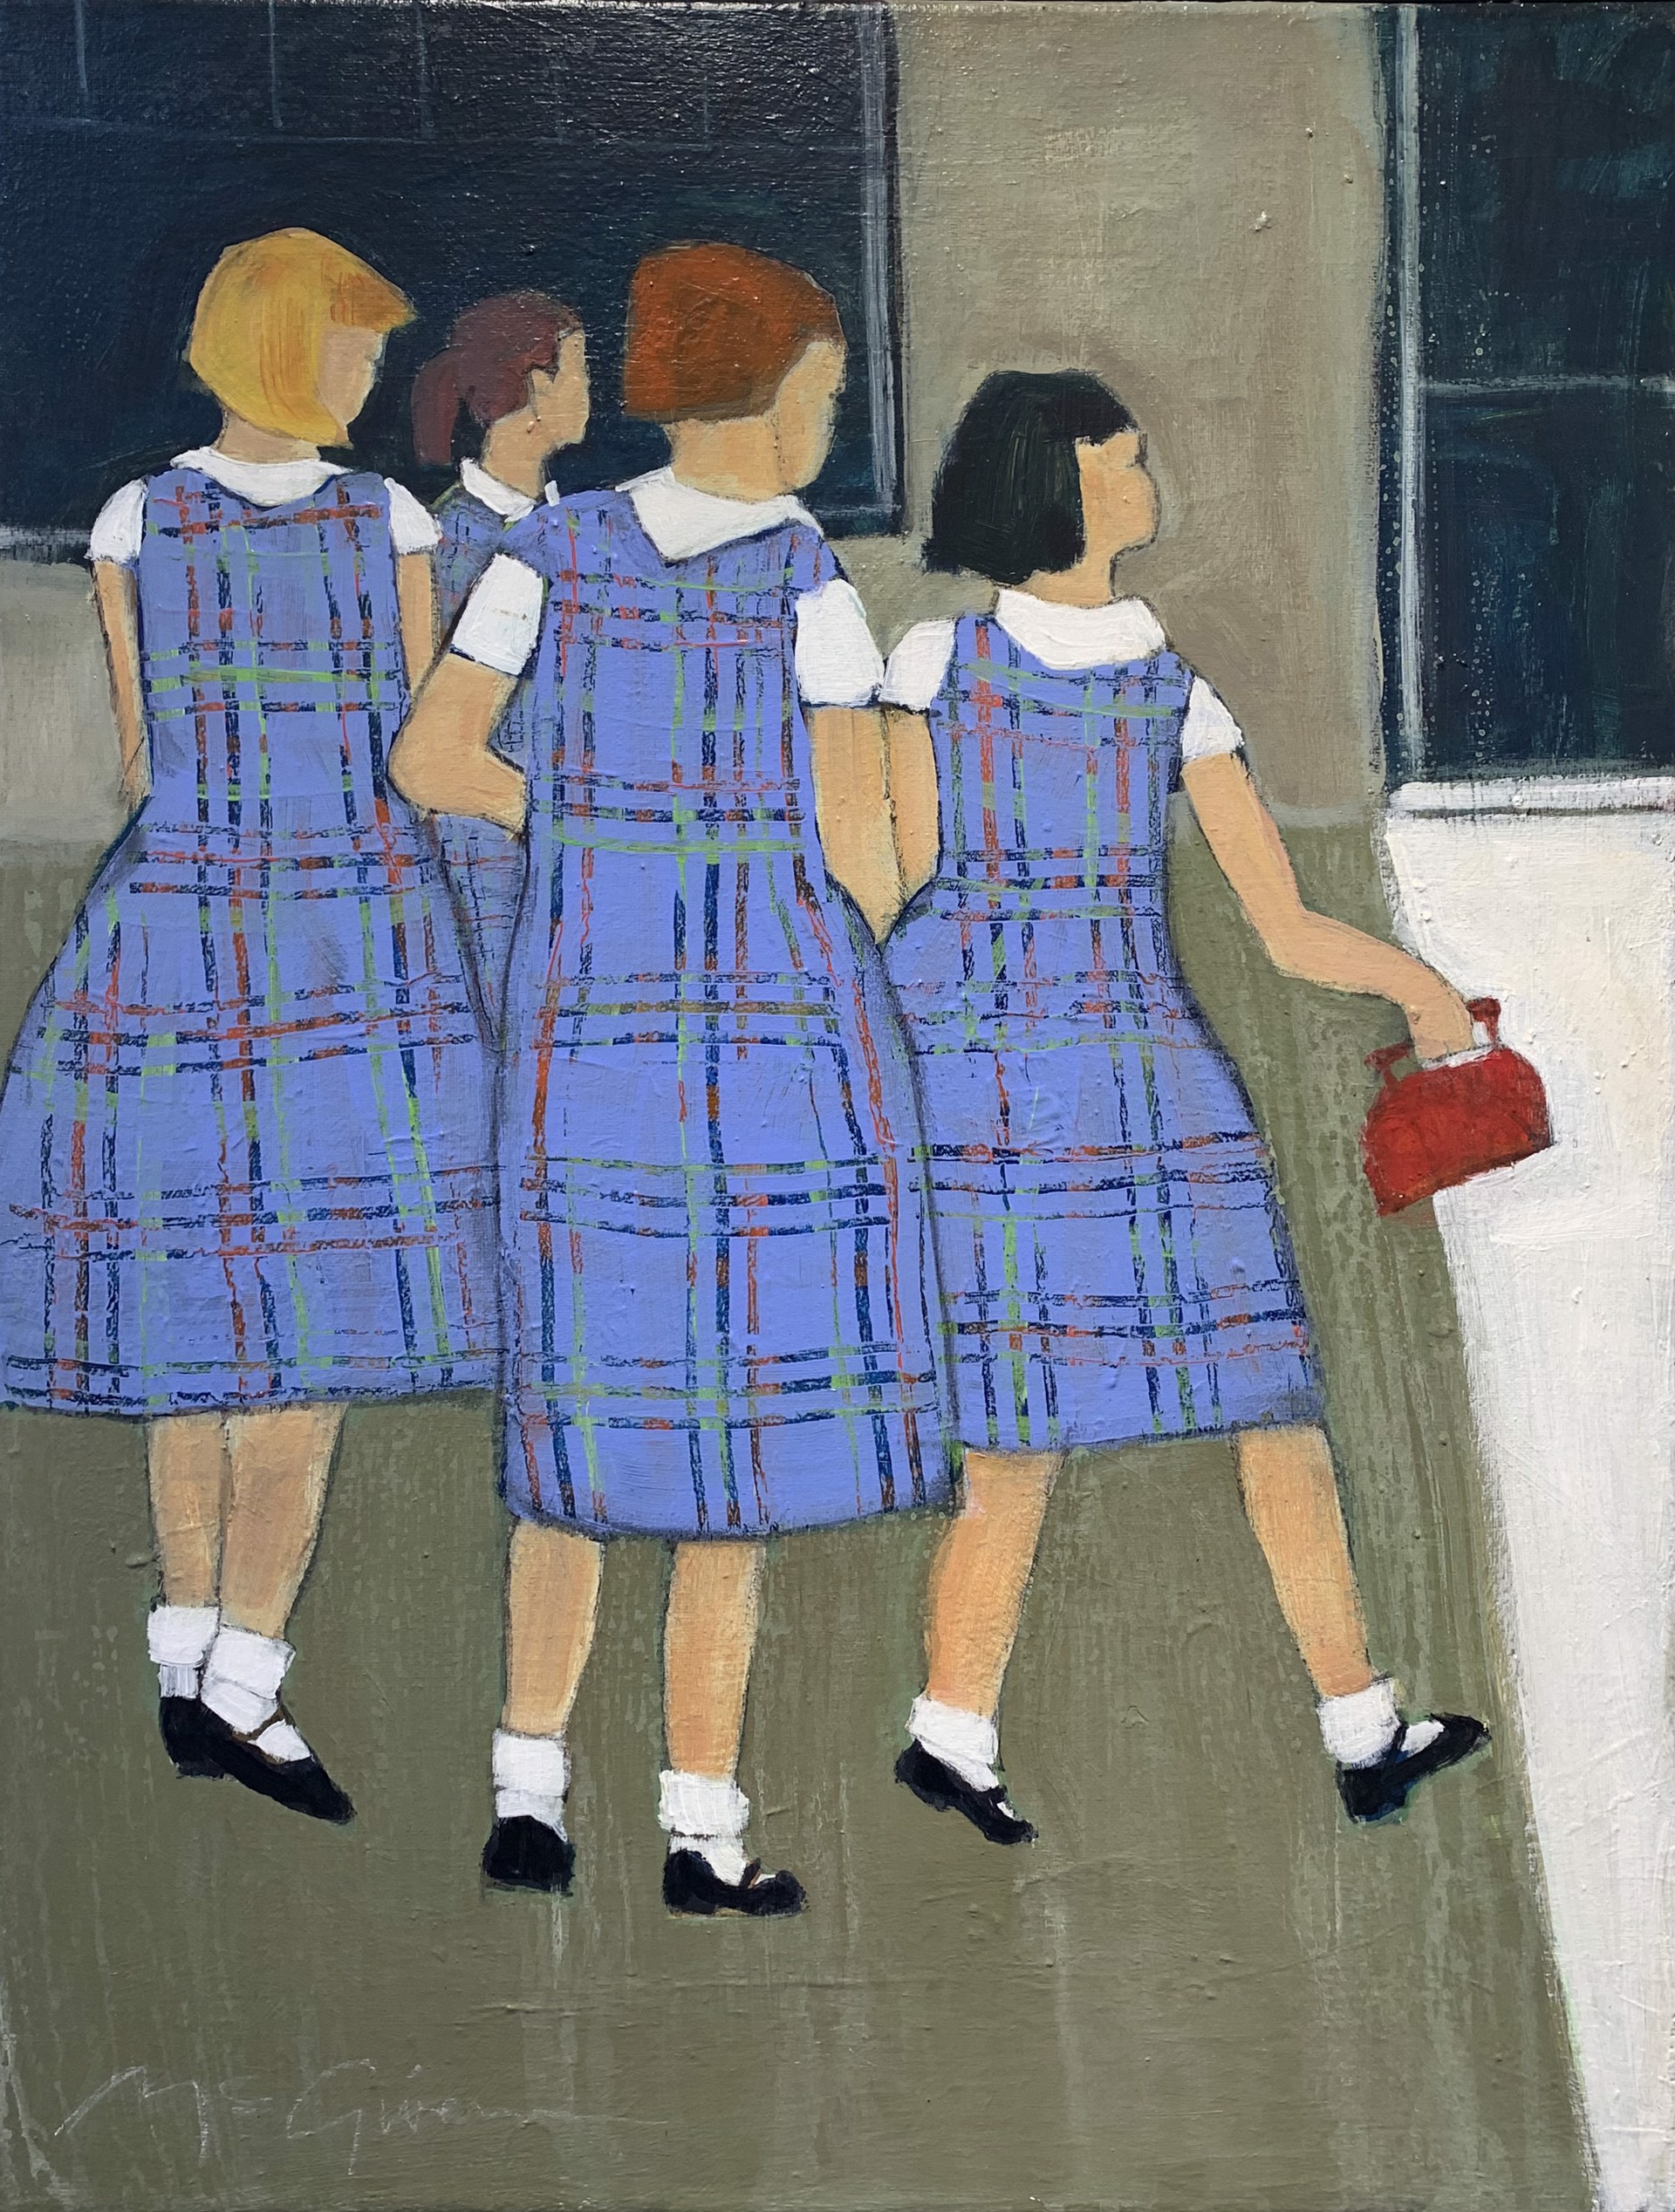 School Uniforms by Peggy McGivern